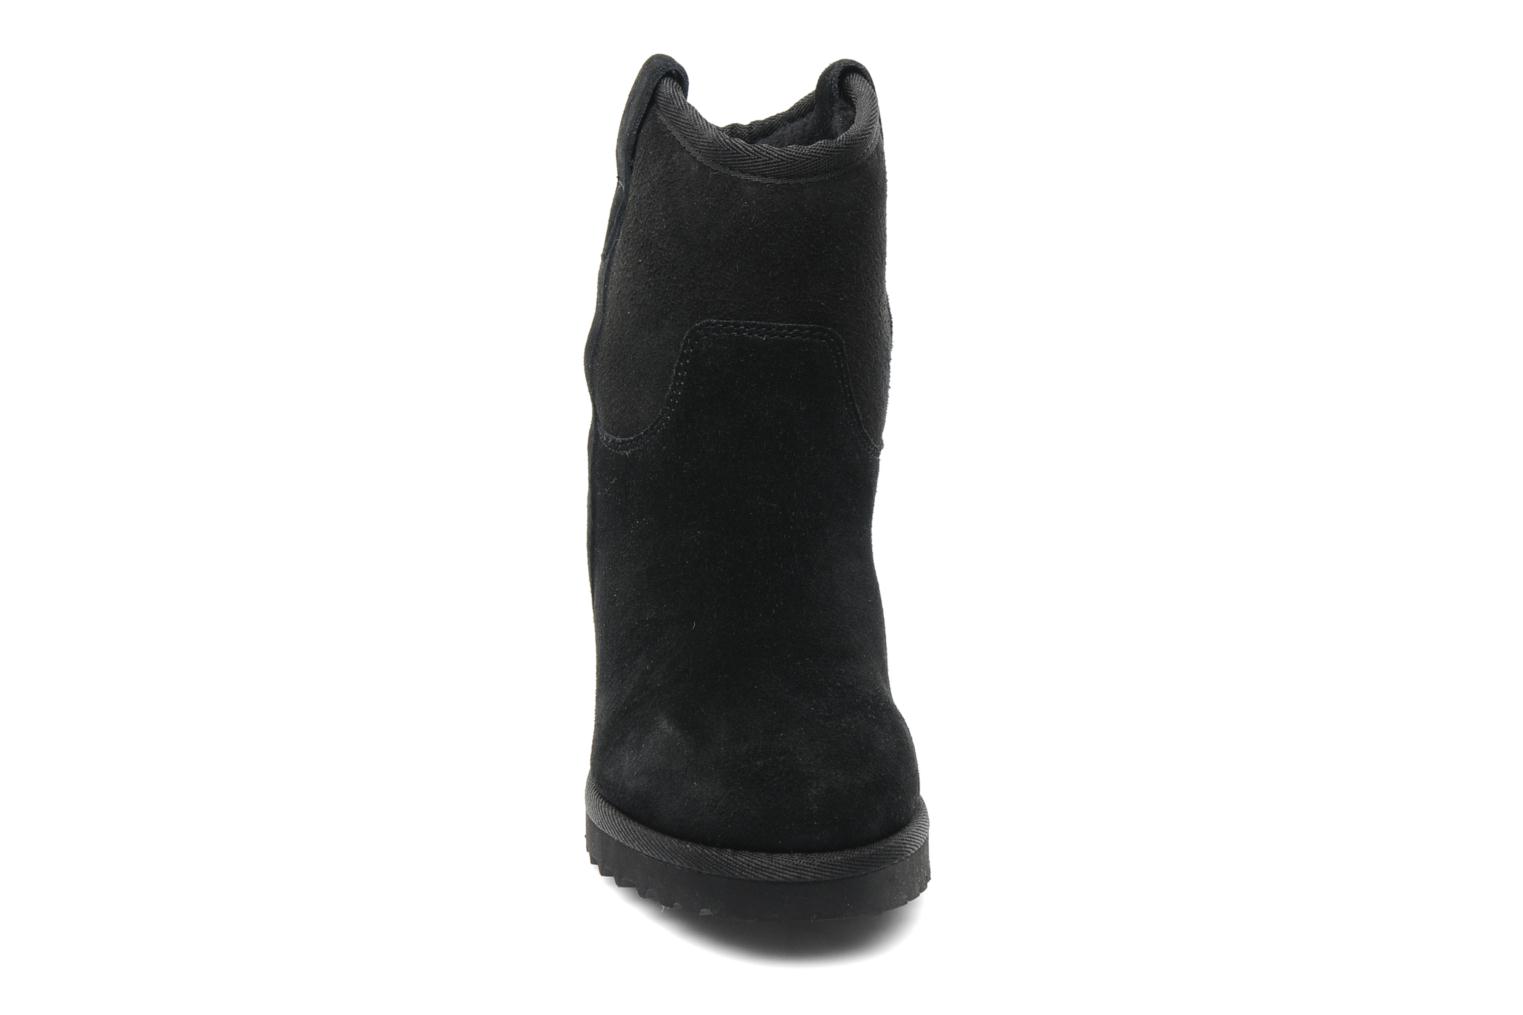 Ash Yahoo Bis Ankle boots in Black at Sarenza (148296)